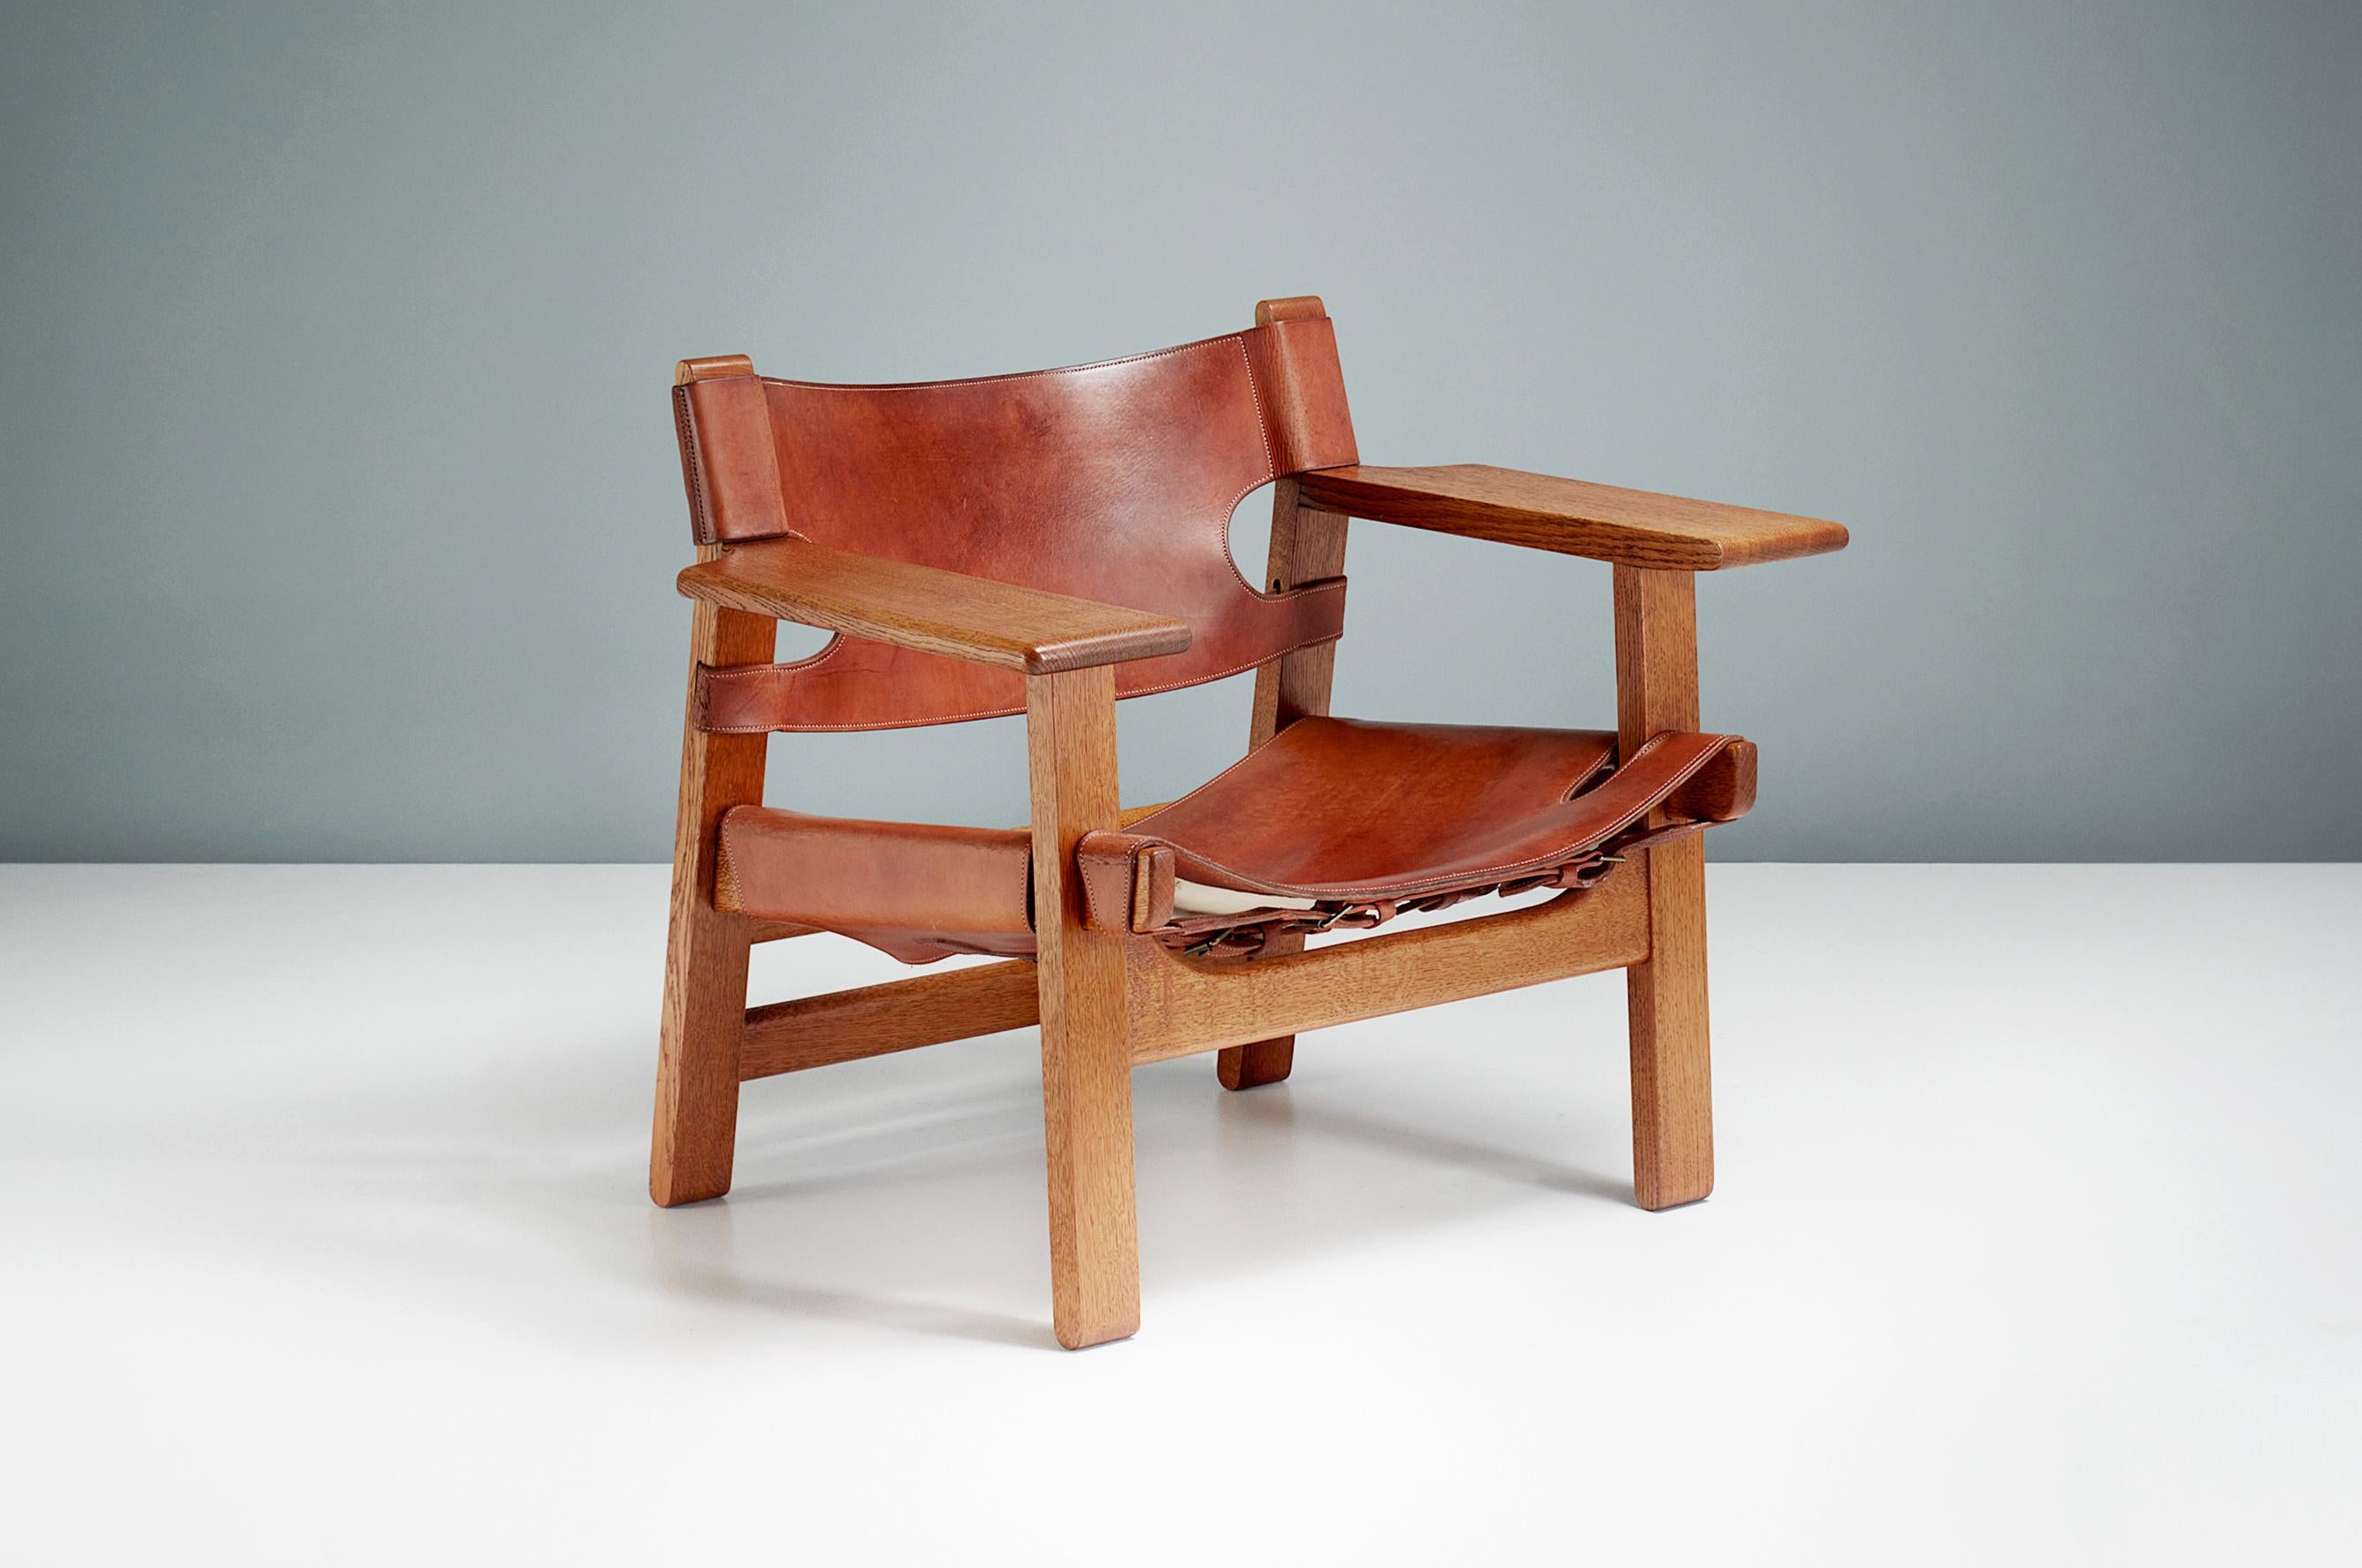 Børge Mogensen

The Spanish Chair, c1958

Manufactured by Fredericia Stolefabrik, Copenhagen, Denmark. Solid oak frame with original, patinated tan saddle leather seat and back and brass fittings. This example was produced in the 1960s.

In 1958,